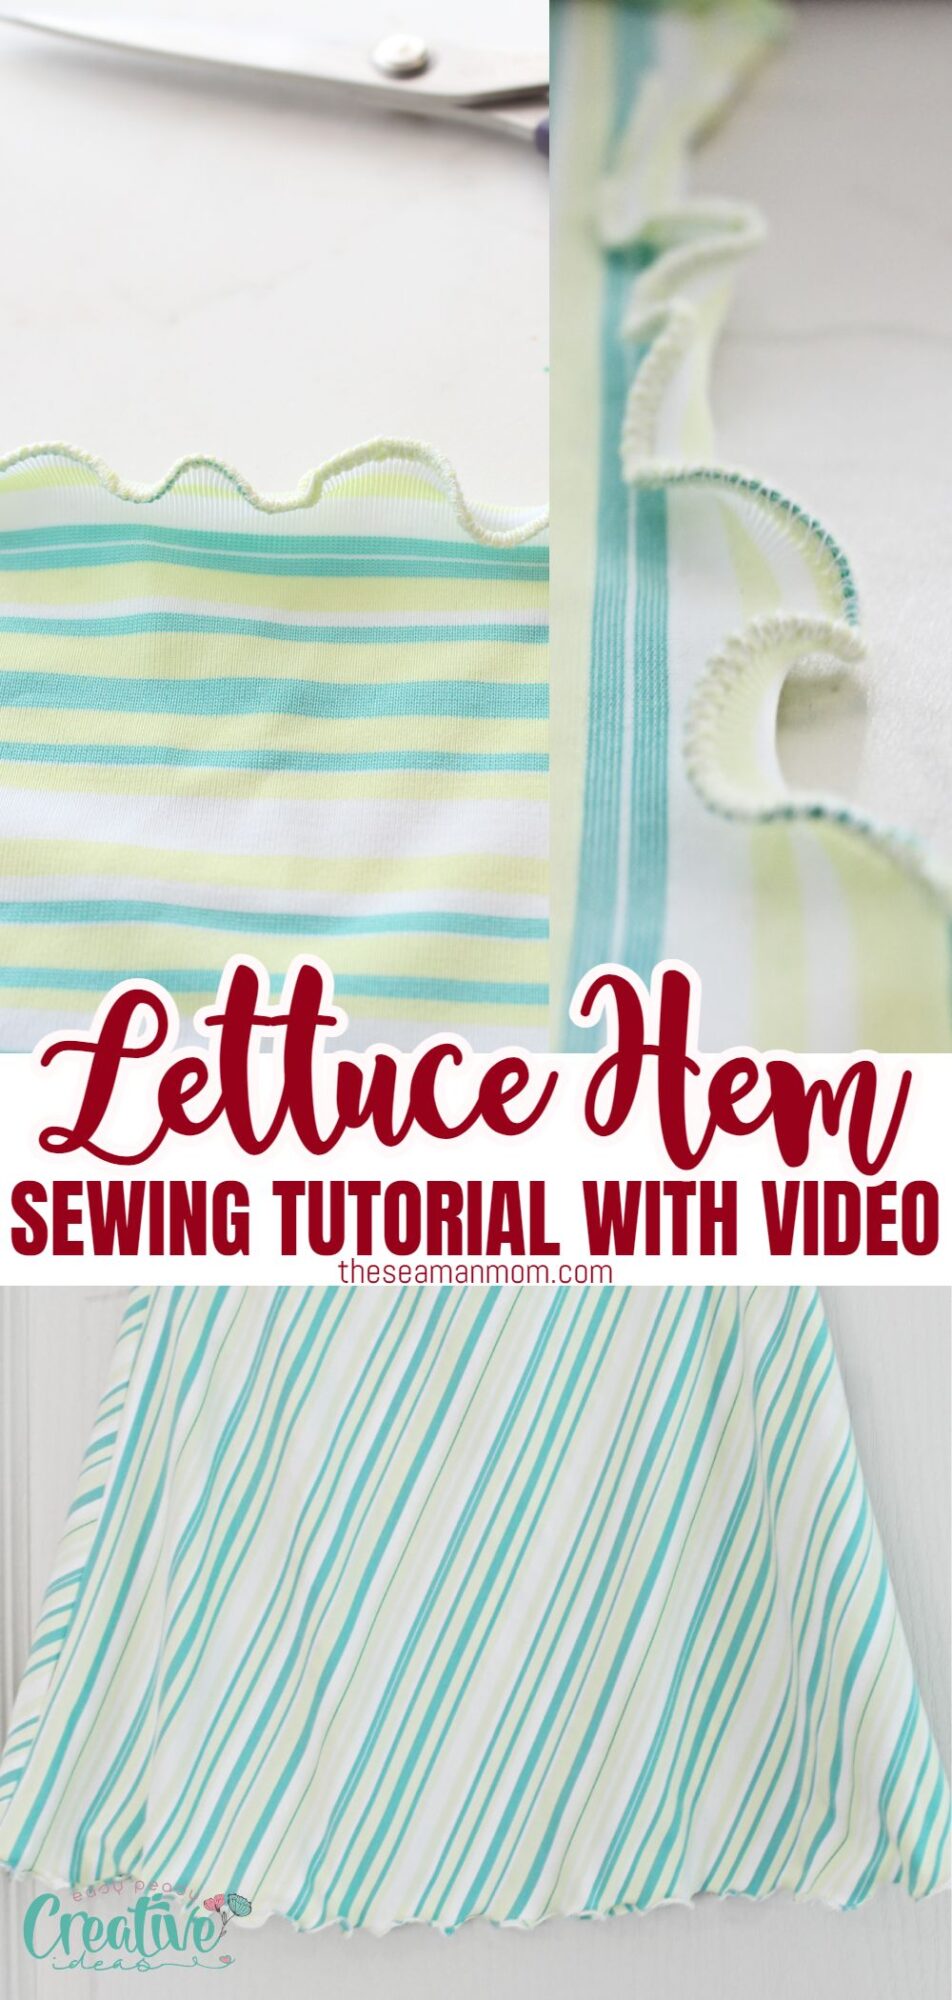 How to Serge a Lettuce Hem - over the edge